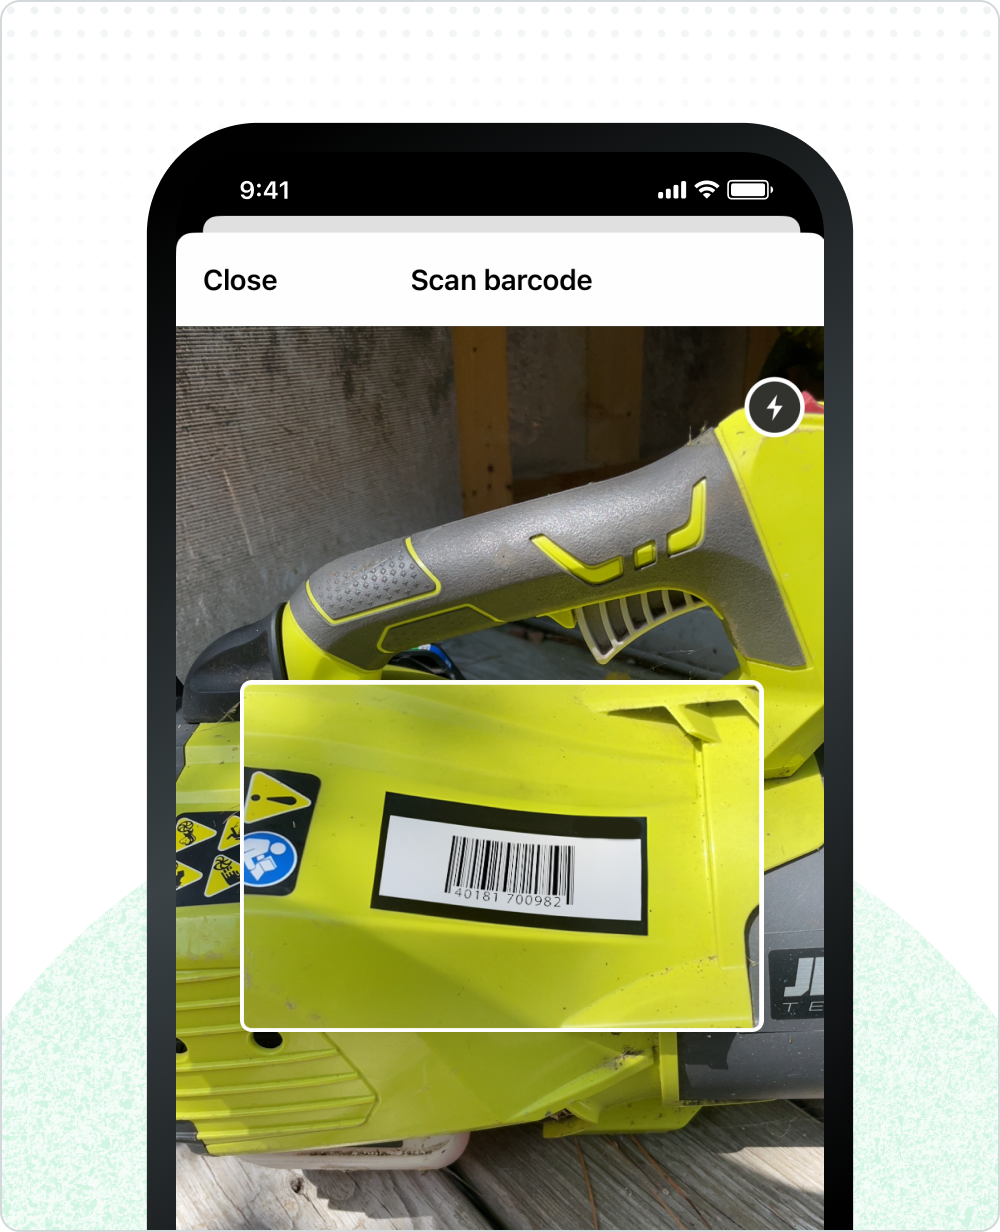 Example of checking out equipment using the barcode scanner in Fleetio Go.